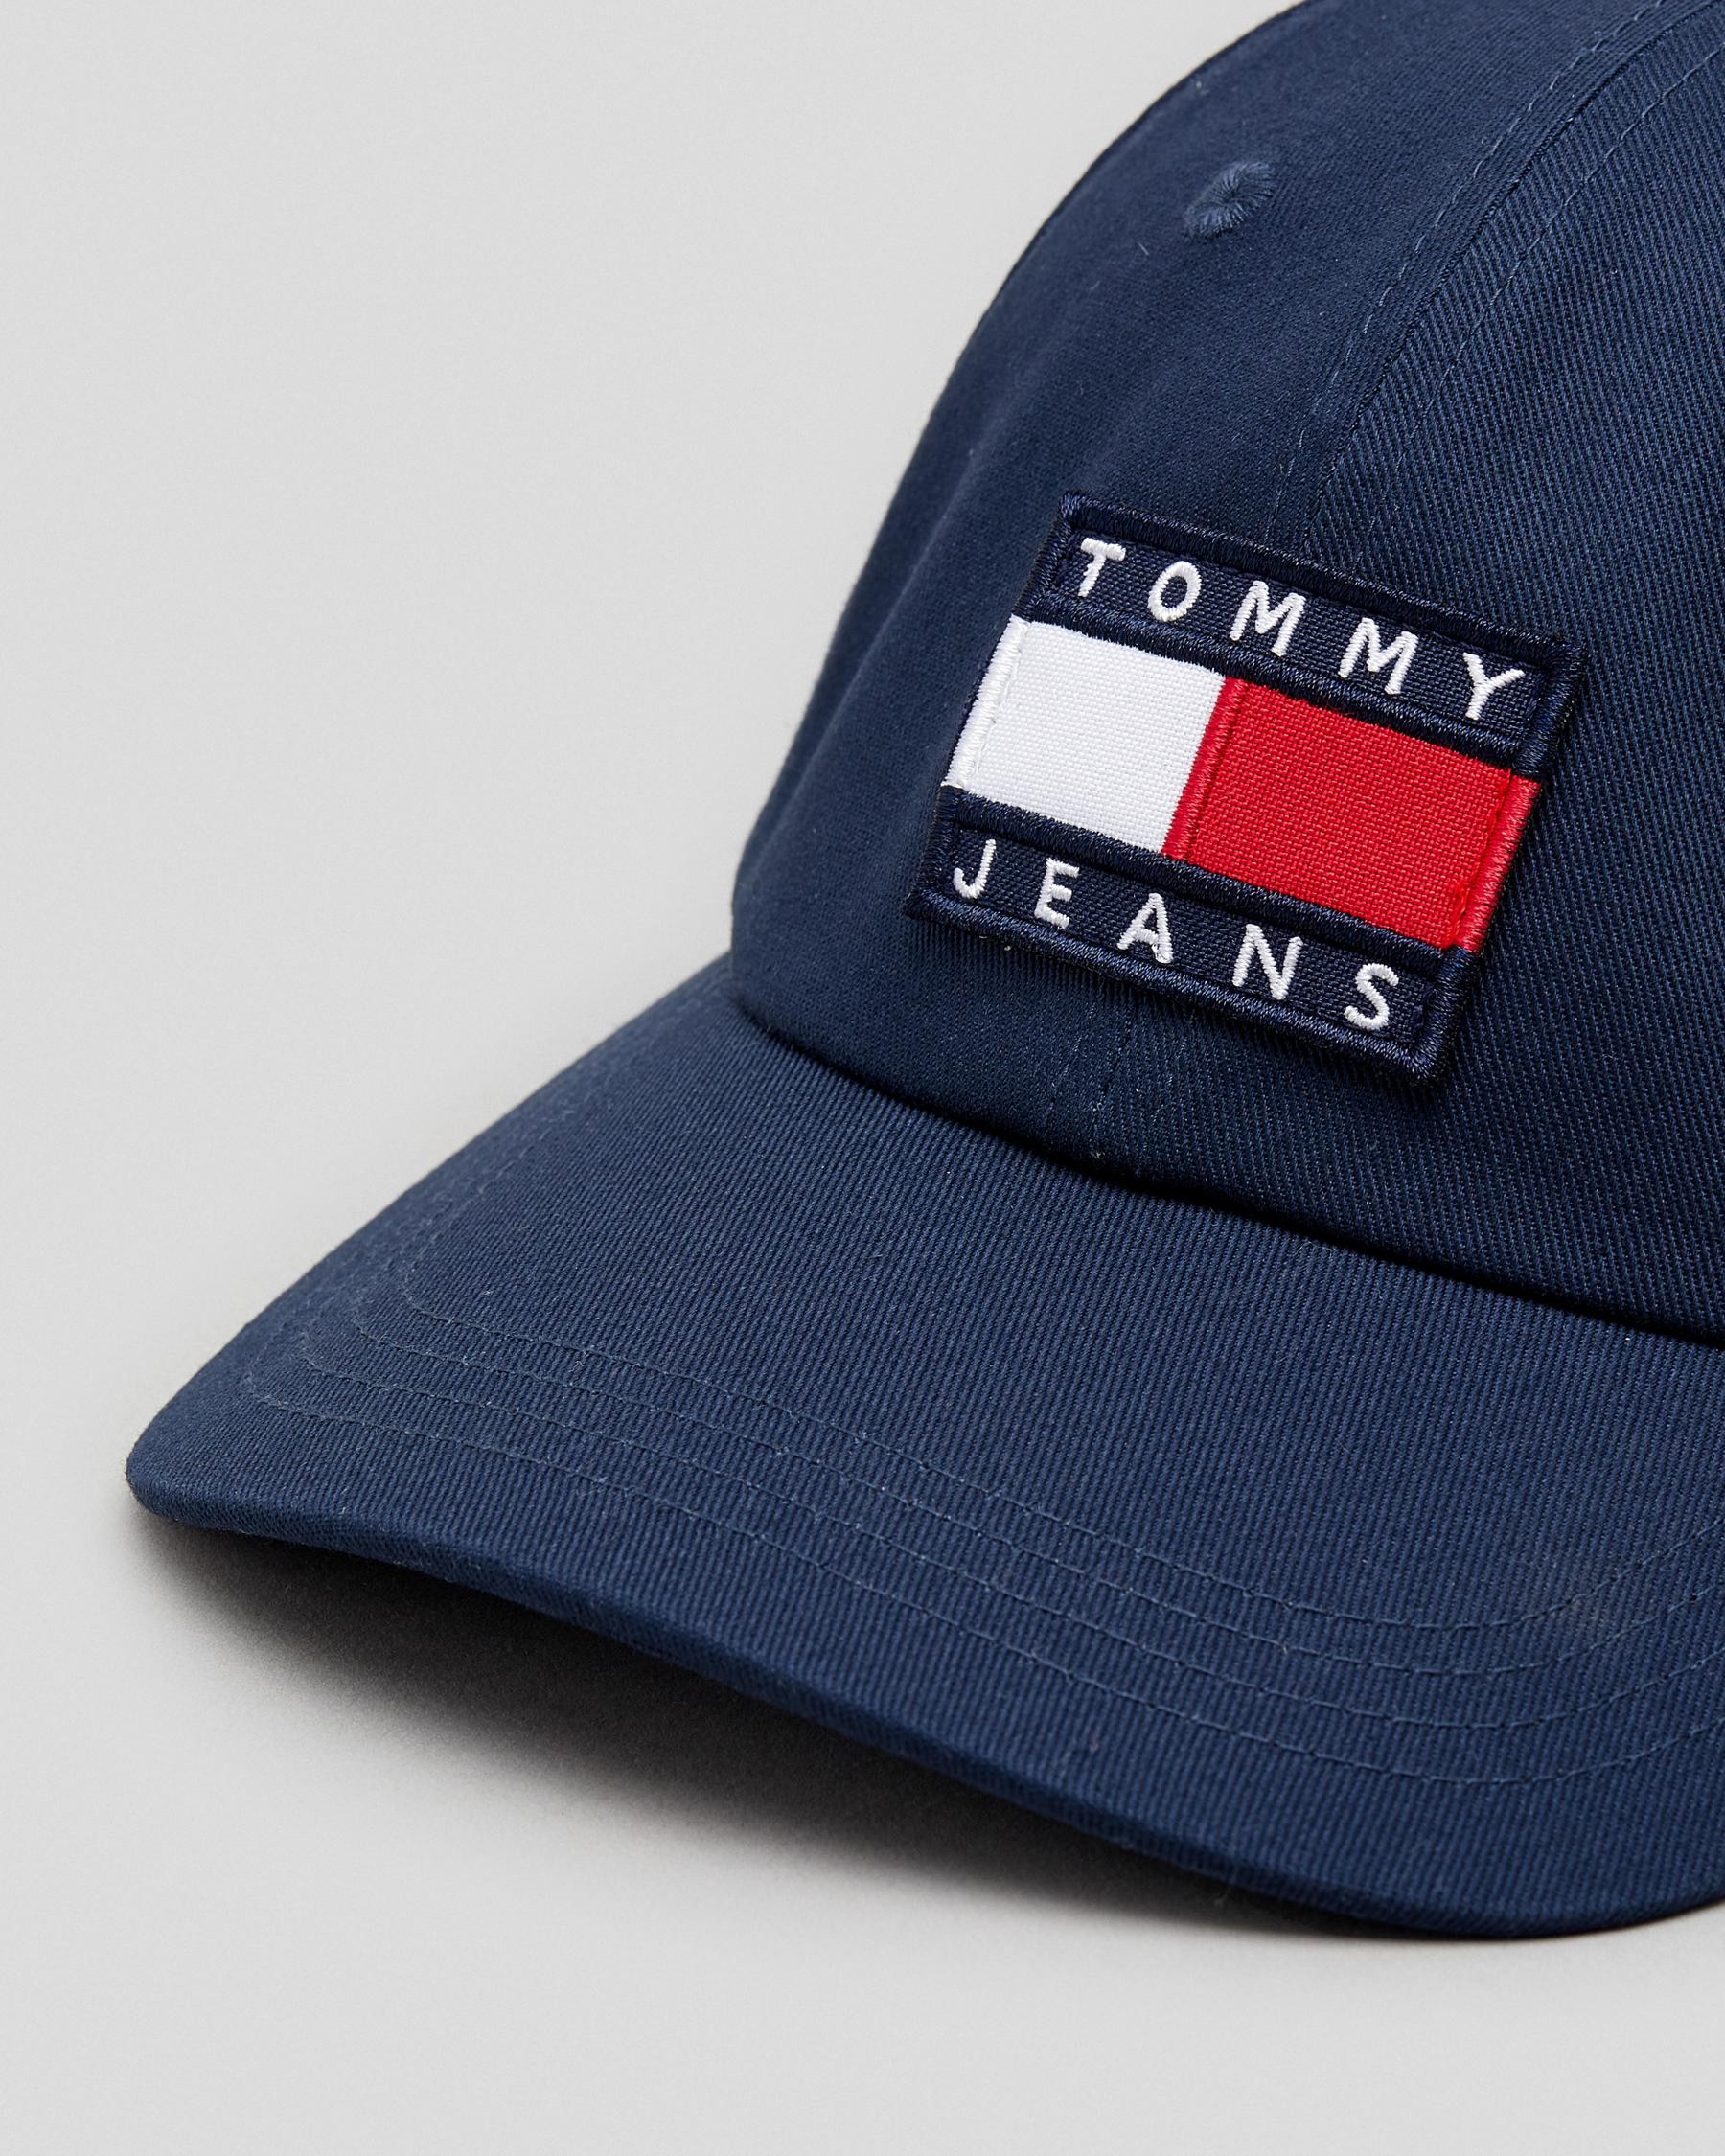 Tommy Hilfiger TJM Heritage Cap In Twilight Navy - FREE* Shipping & Easy  Returns - City Beach United States